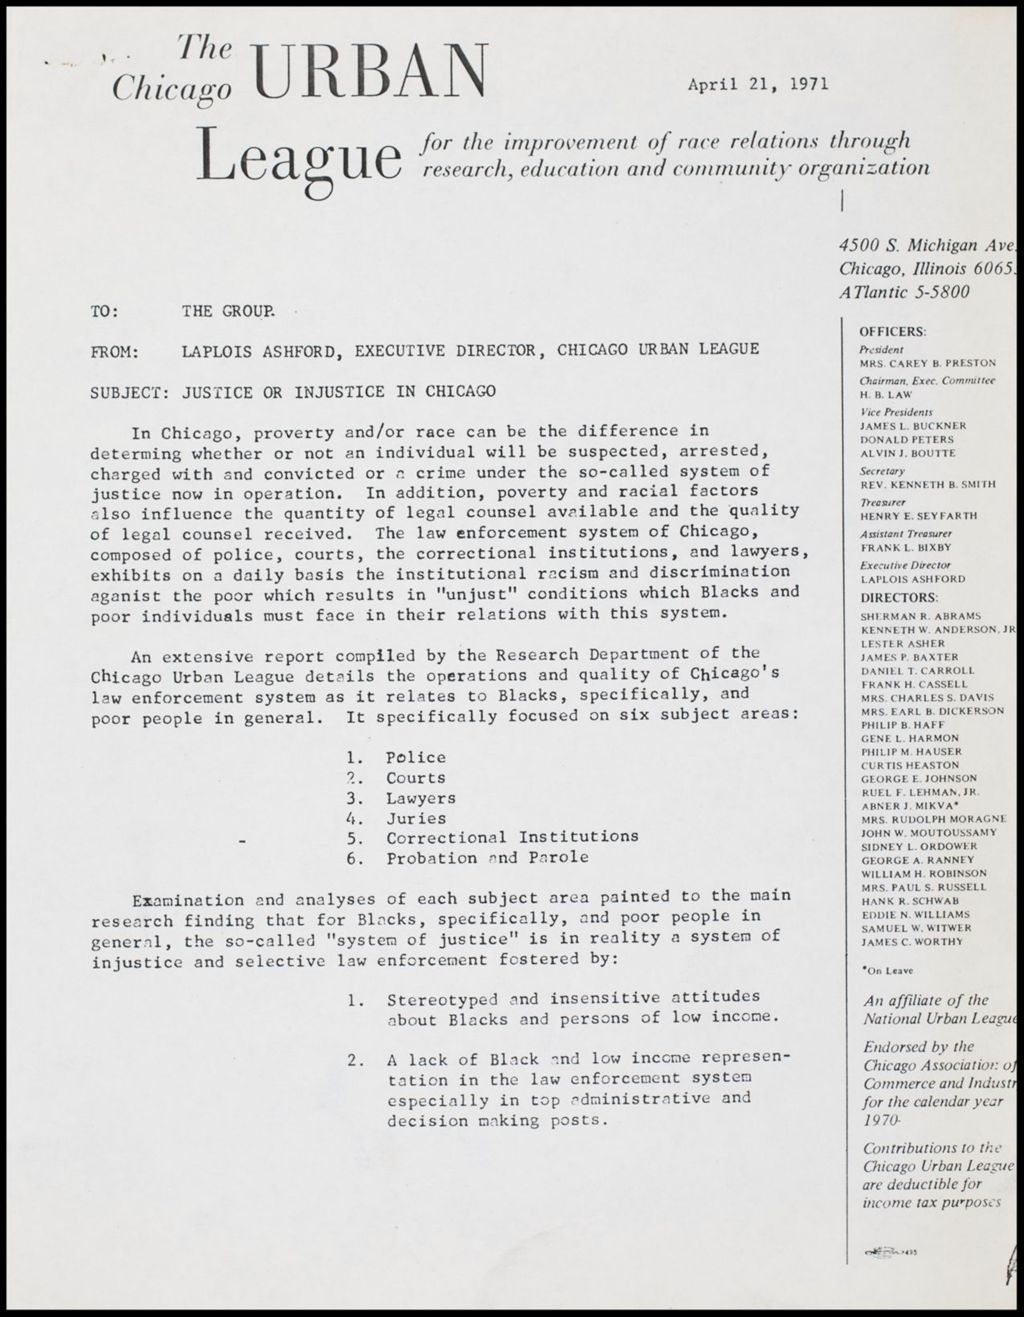 Race Relations and Law Enforcement Reports, 1971 (Folder III-1884)